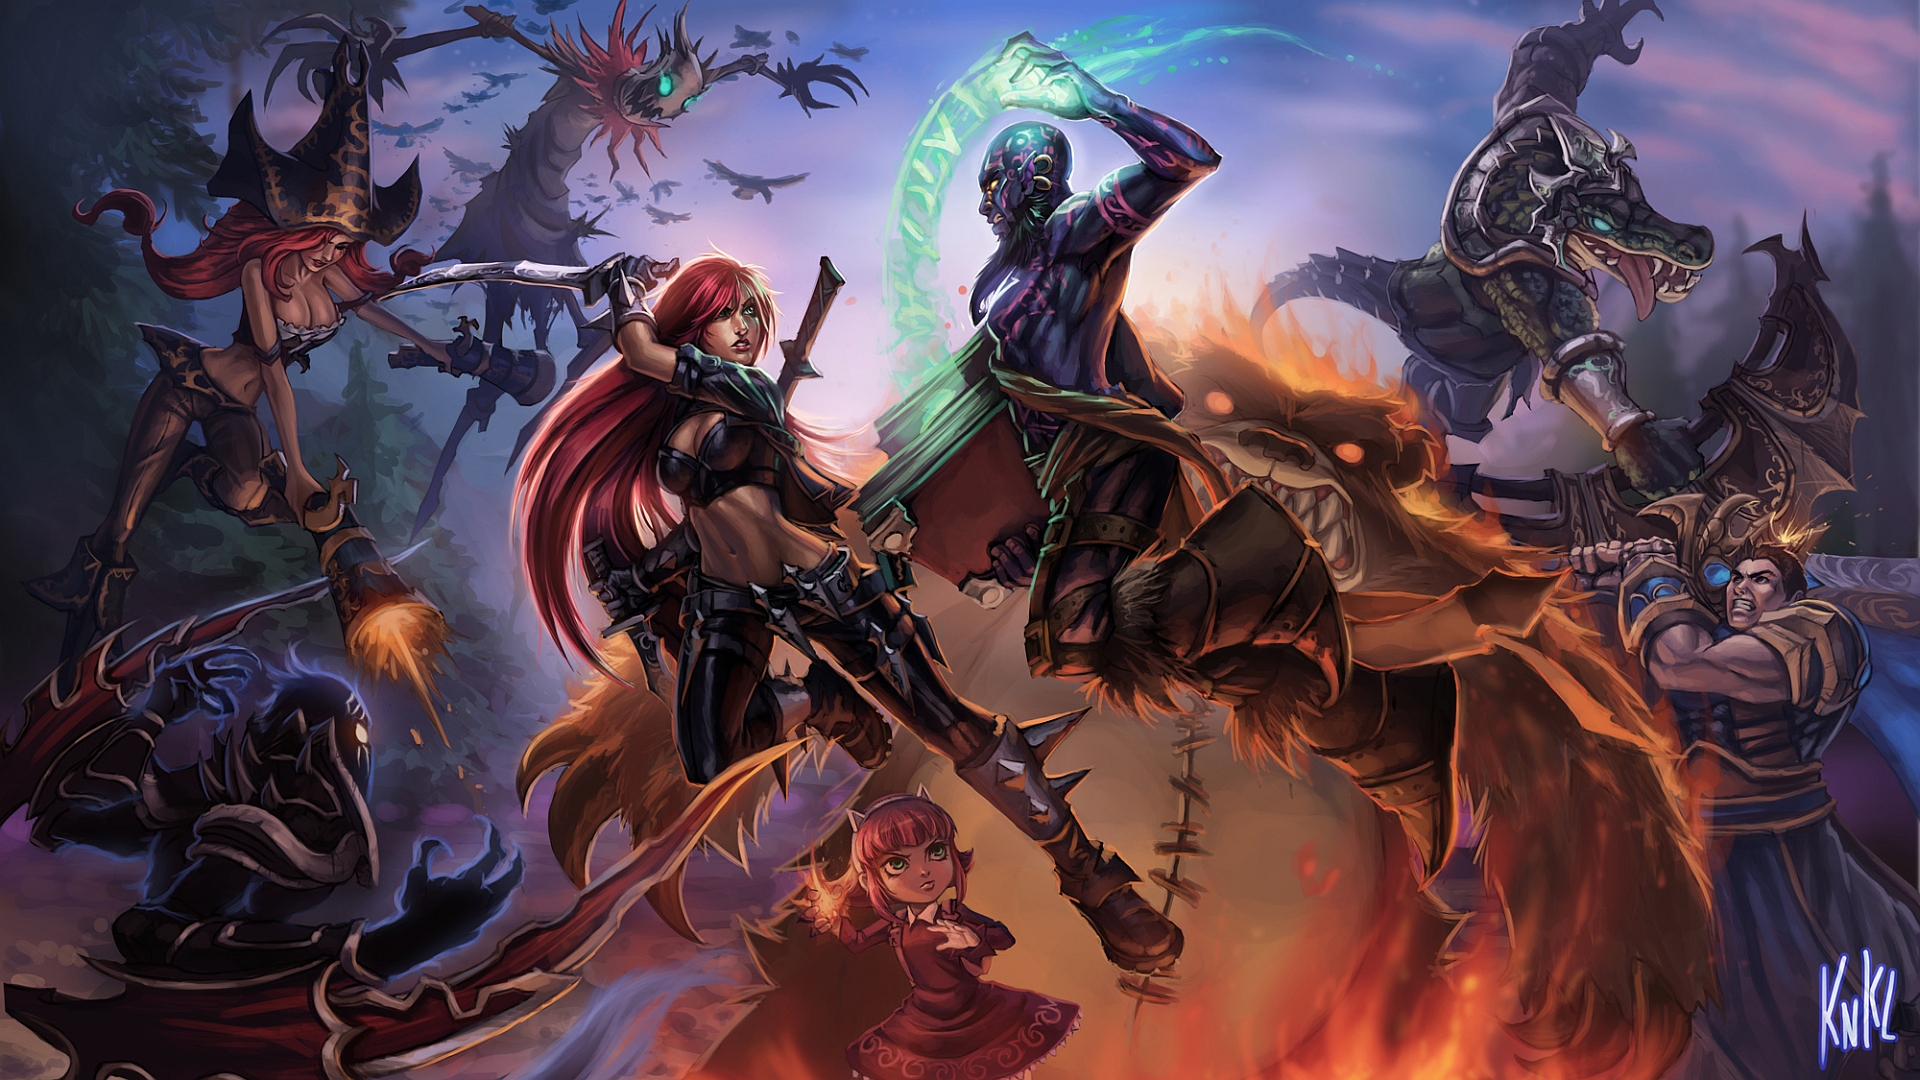 Free HD video game, league of legends, annie (league of legends), fiddlesticks (league of legends), garen (league of legends), katarina (league of legends), miss fortune (league of legends), nocturne (league of legends), renekton (league of legends), ryze (league of legends), tibbers (league of legends)